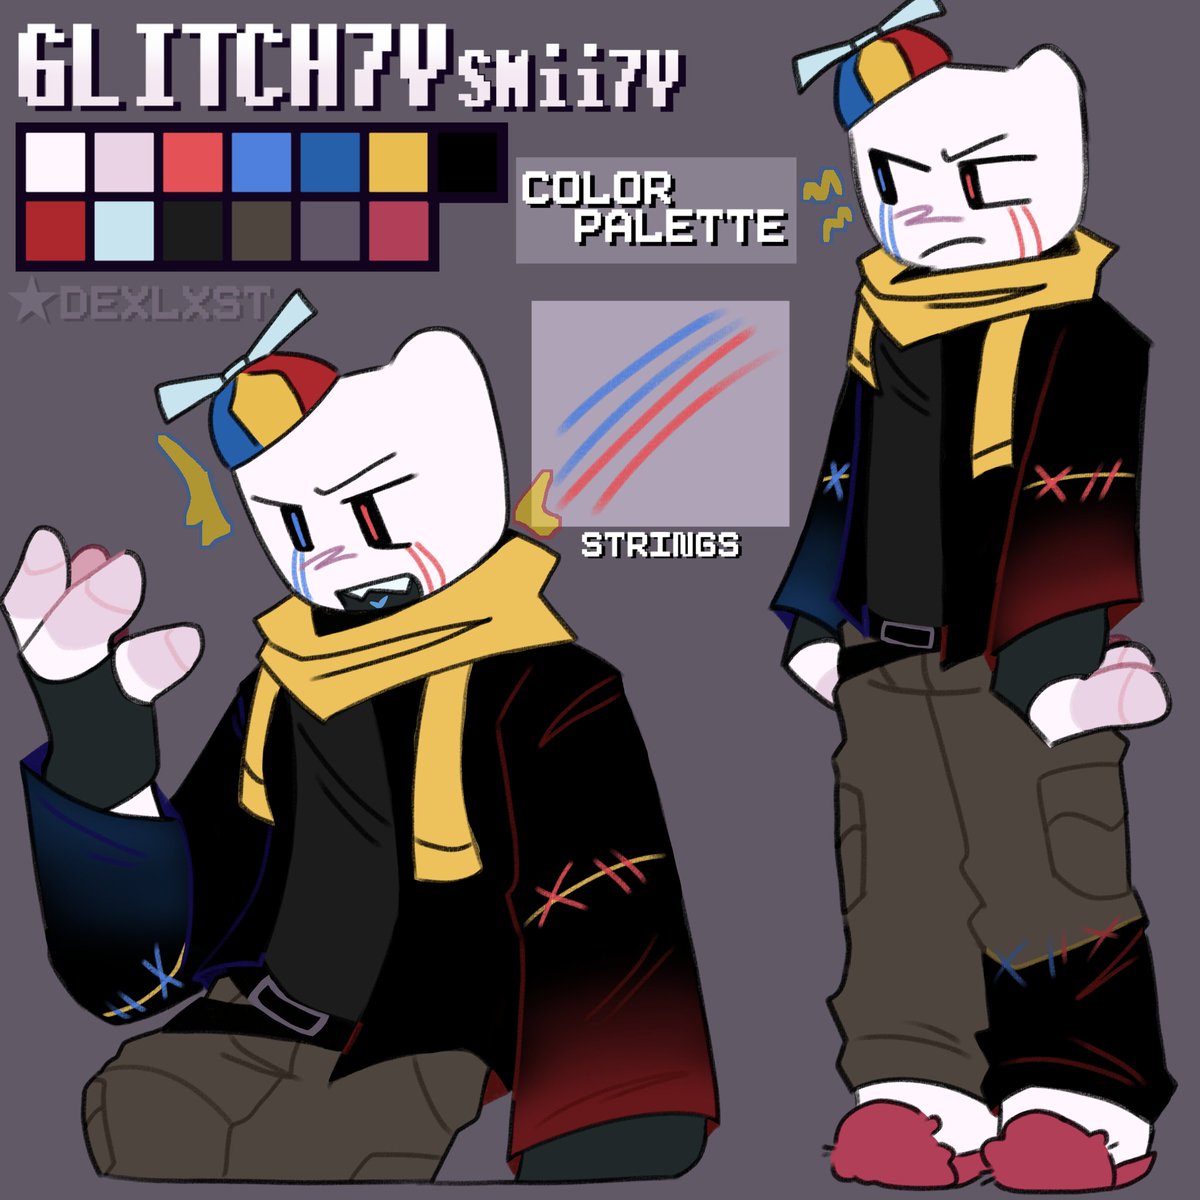 AND HE'S DONE!
Before you say 'Ink Kryoz when?' Be aware that this au is a COLLAB AU, so i am collaborating with another artist to work on these two! So yeah!!
#smii7yau #smii7y #glitch7y #au #alternateuniverse #design #designreference #artist #ibispaintx